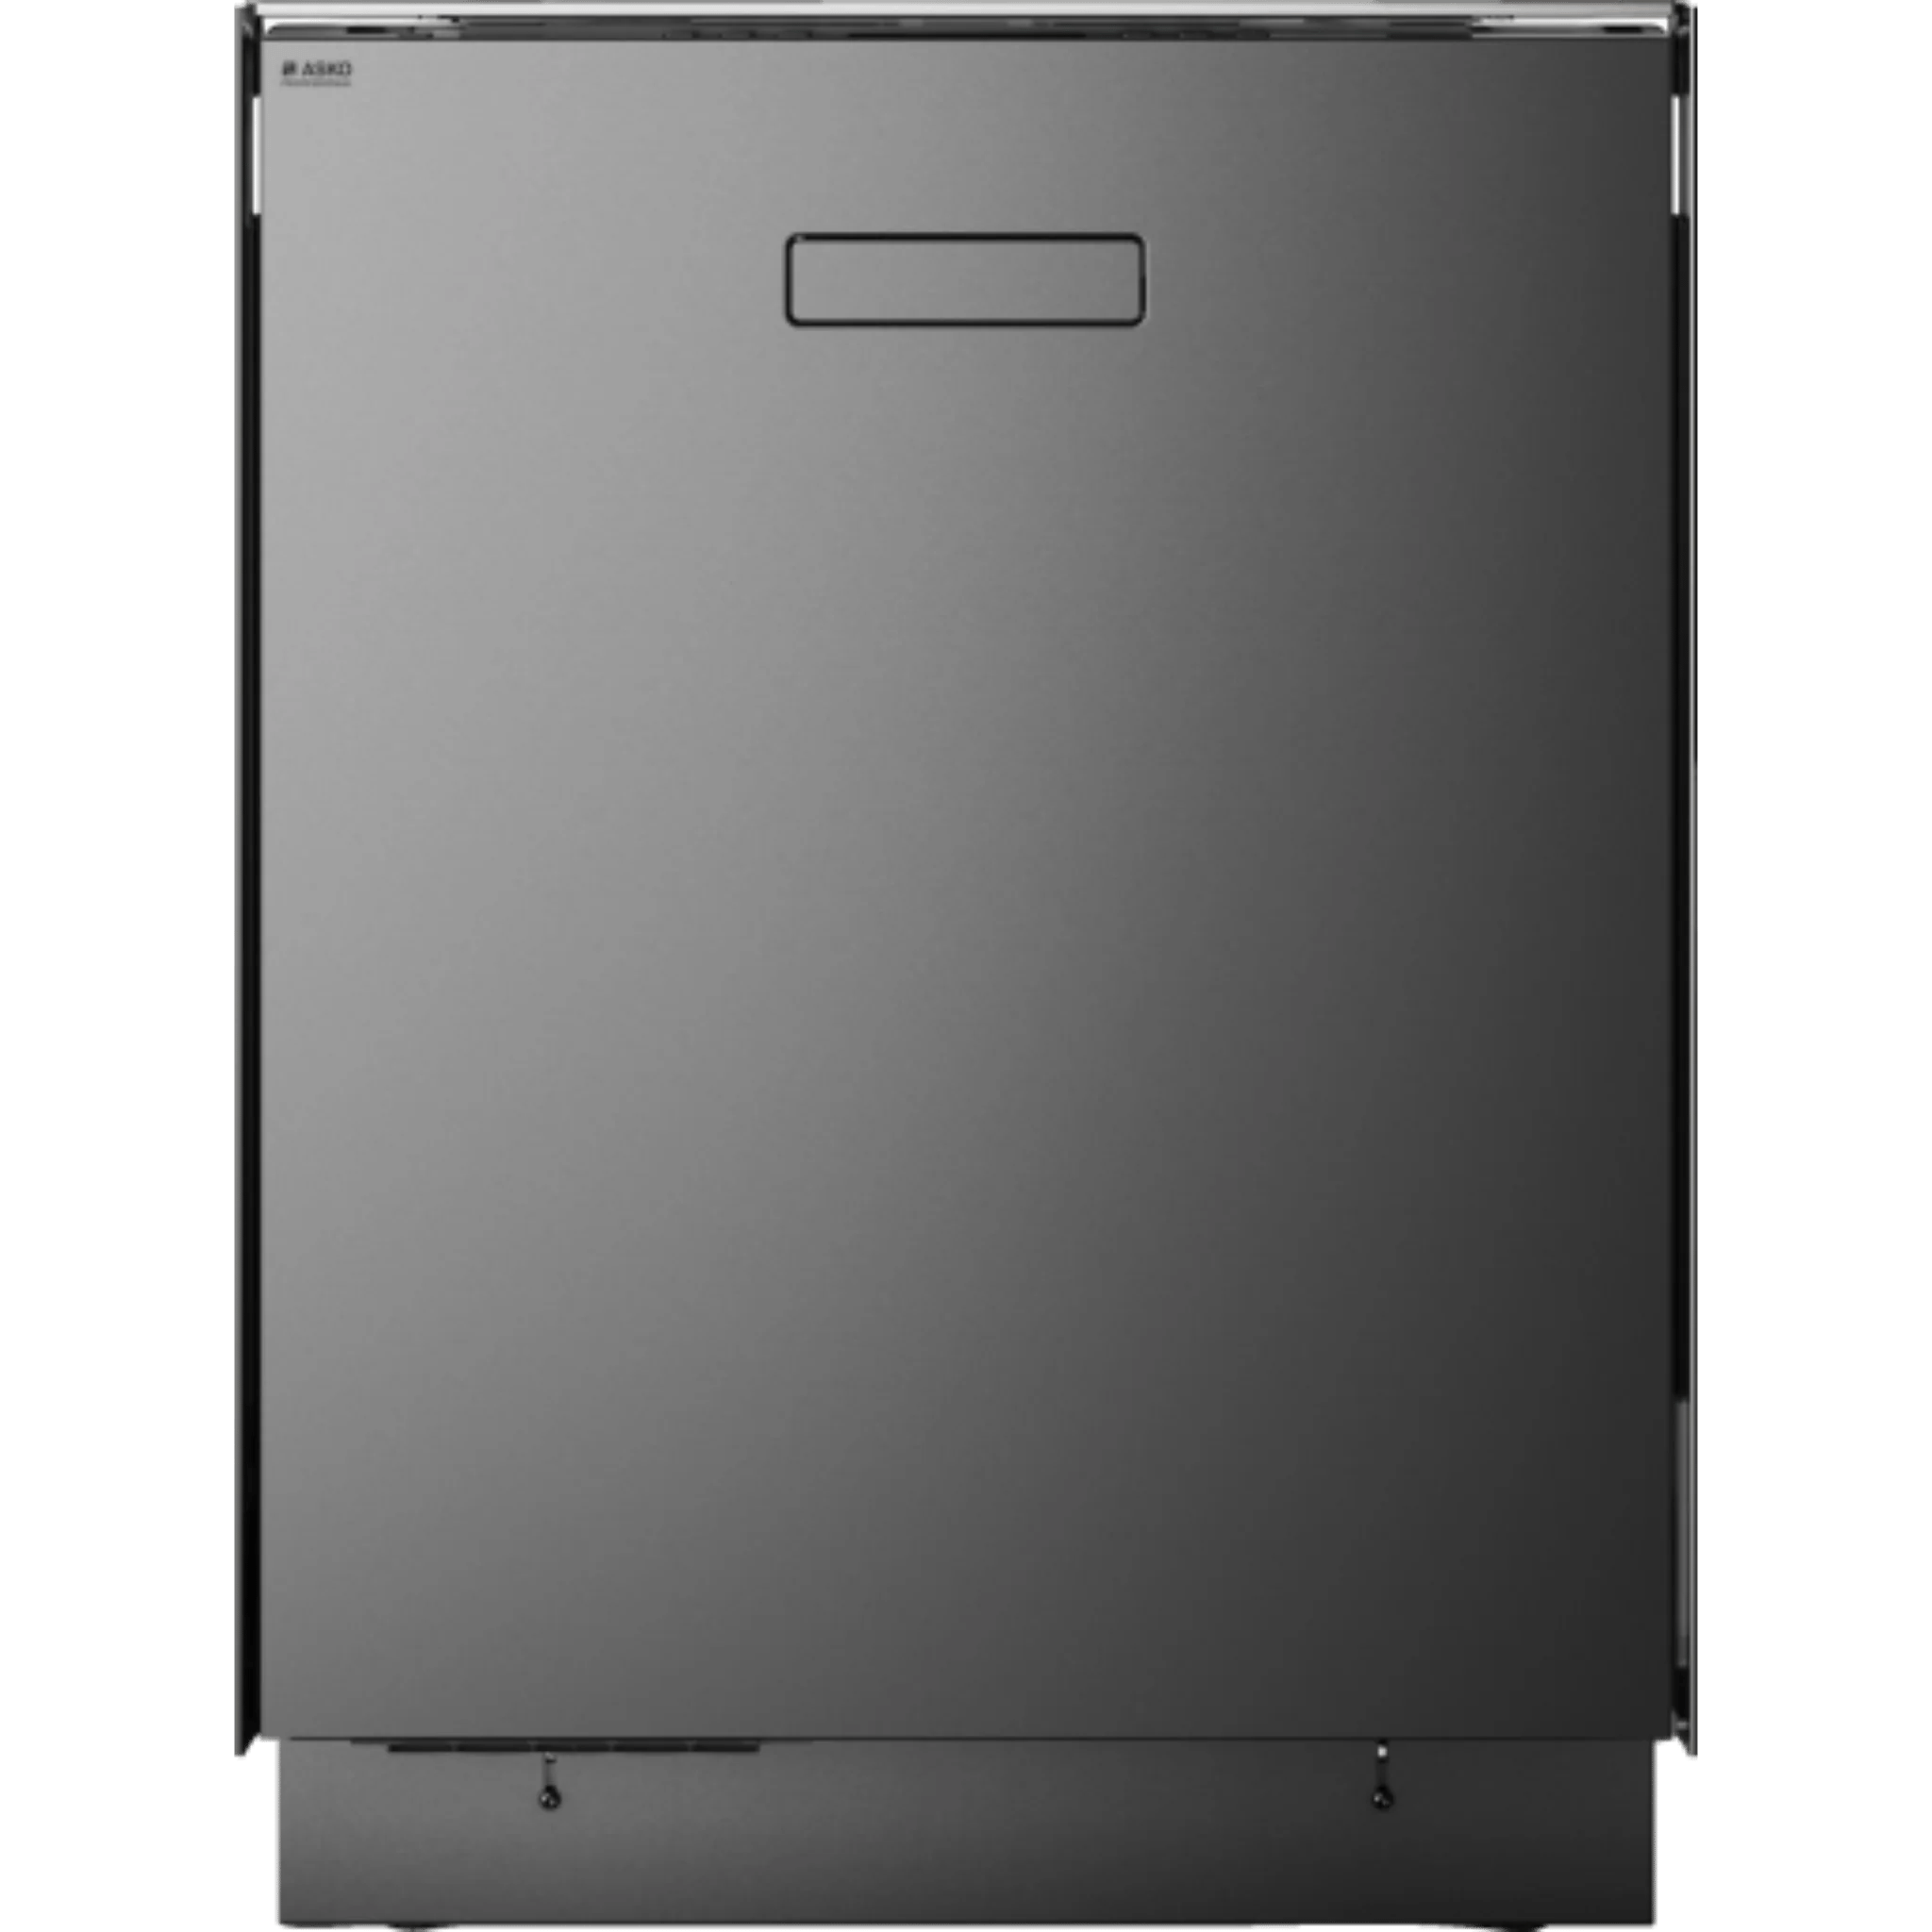 Asko 30 Series 24 Inch Wide 16 Place Setting Energy Star Rated Built-In Top Control Dishwasher with Condensation Drying and Water Softener Dishwashers DBI663ISSOF Luxury Appliances Direct